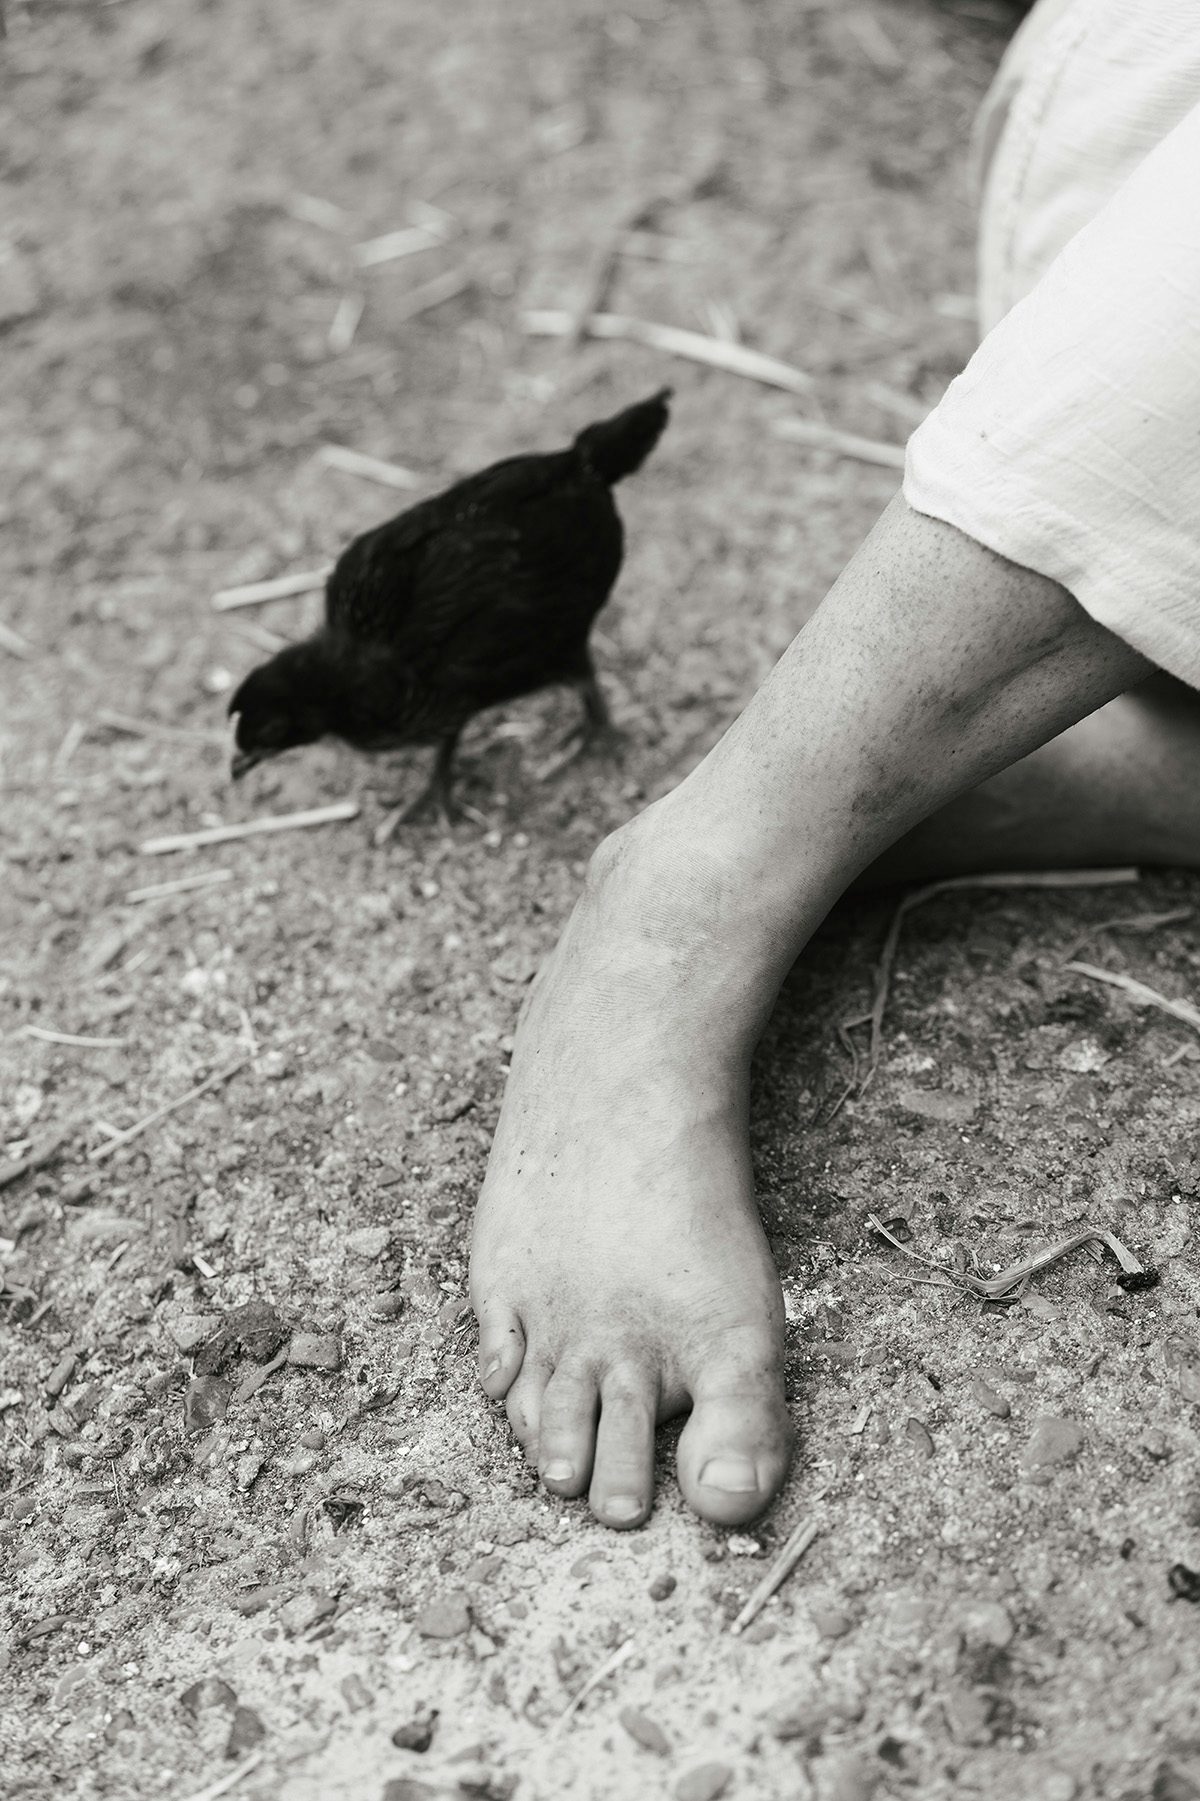 Black and white photograph shows a chick stood next to a person's foot, taken from Yana Wernicke's book Companions